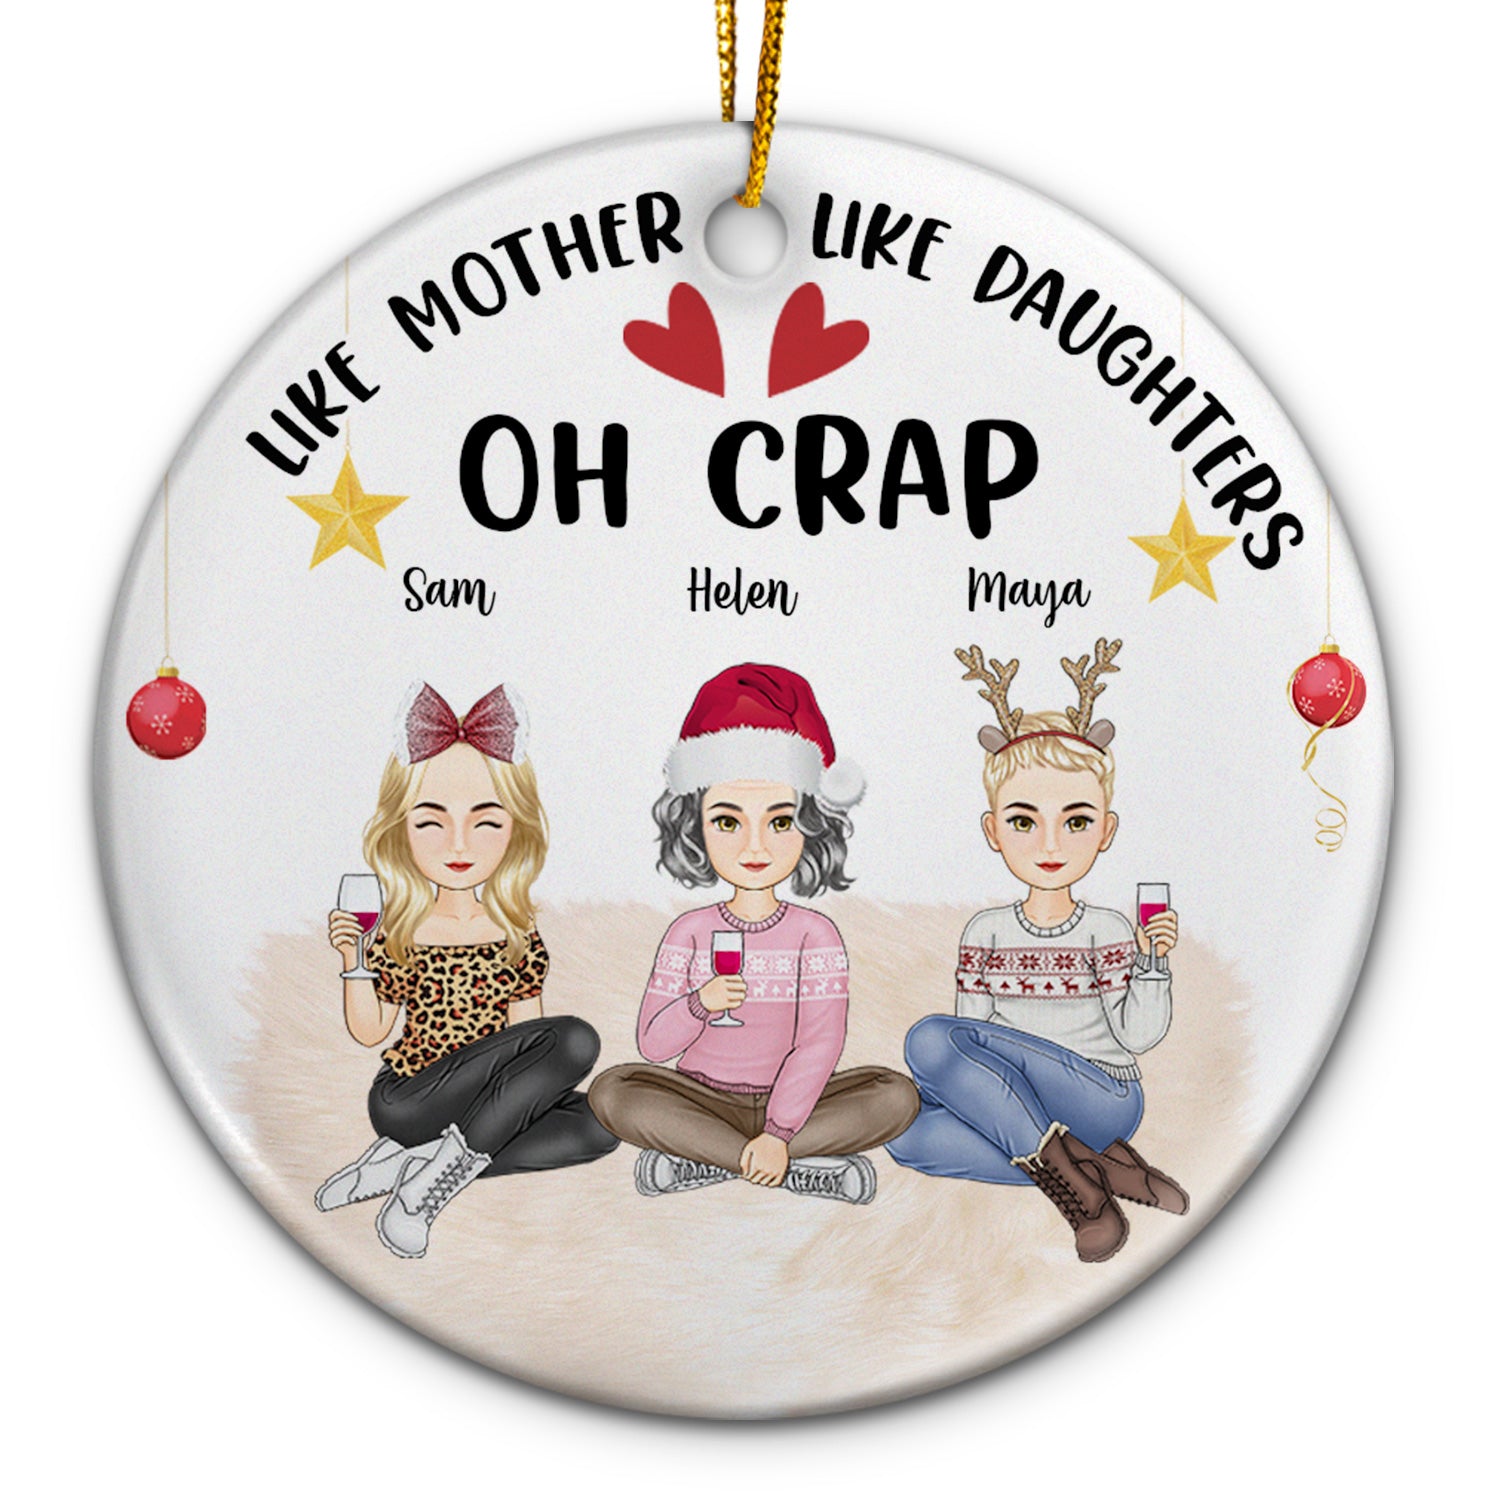 Like Mother Like Daughter - Christmas Gift For Mother Daughter - Personalized Circle Ceramic Ornament